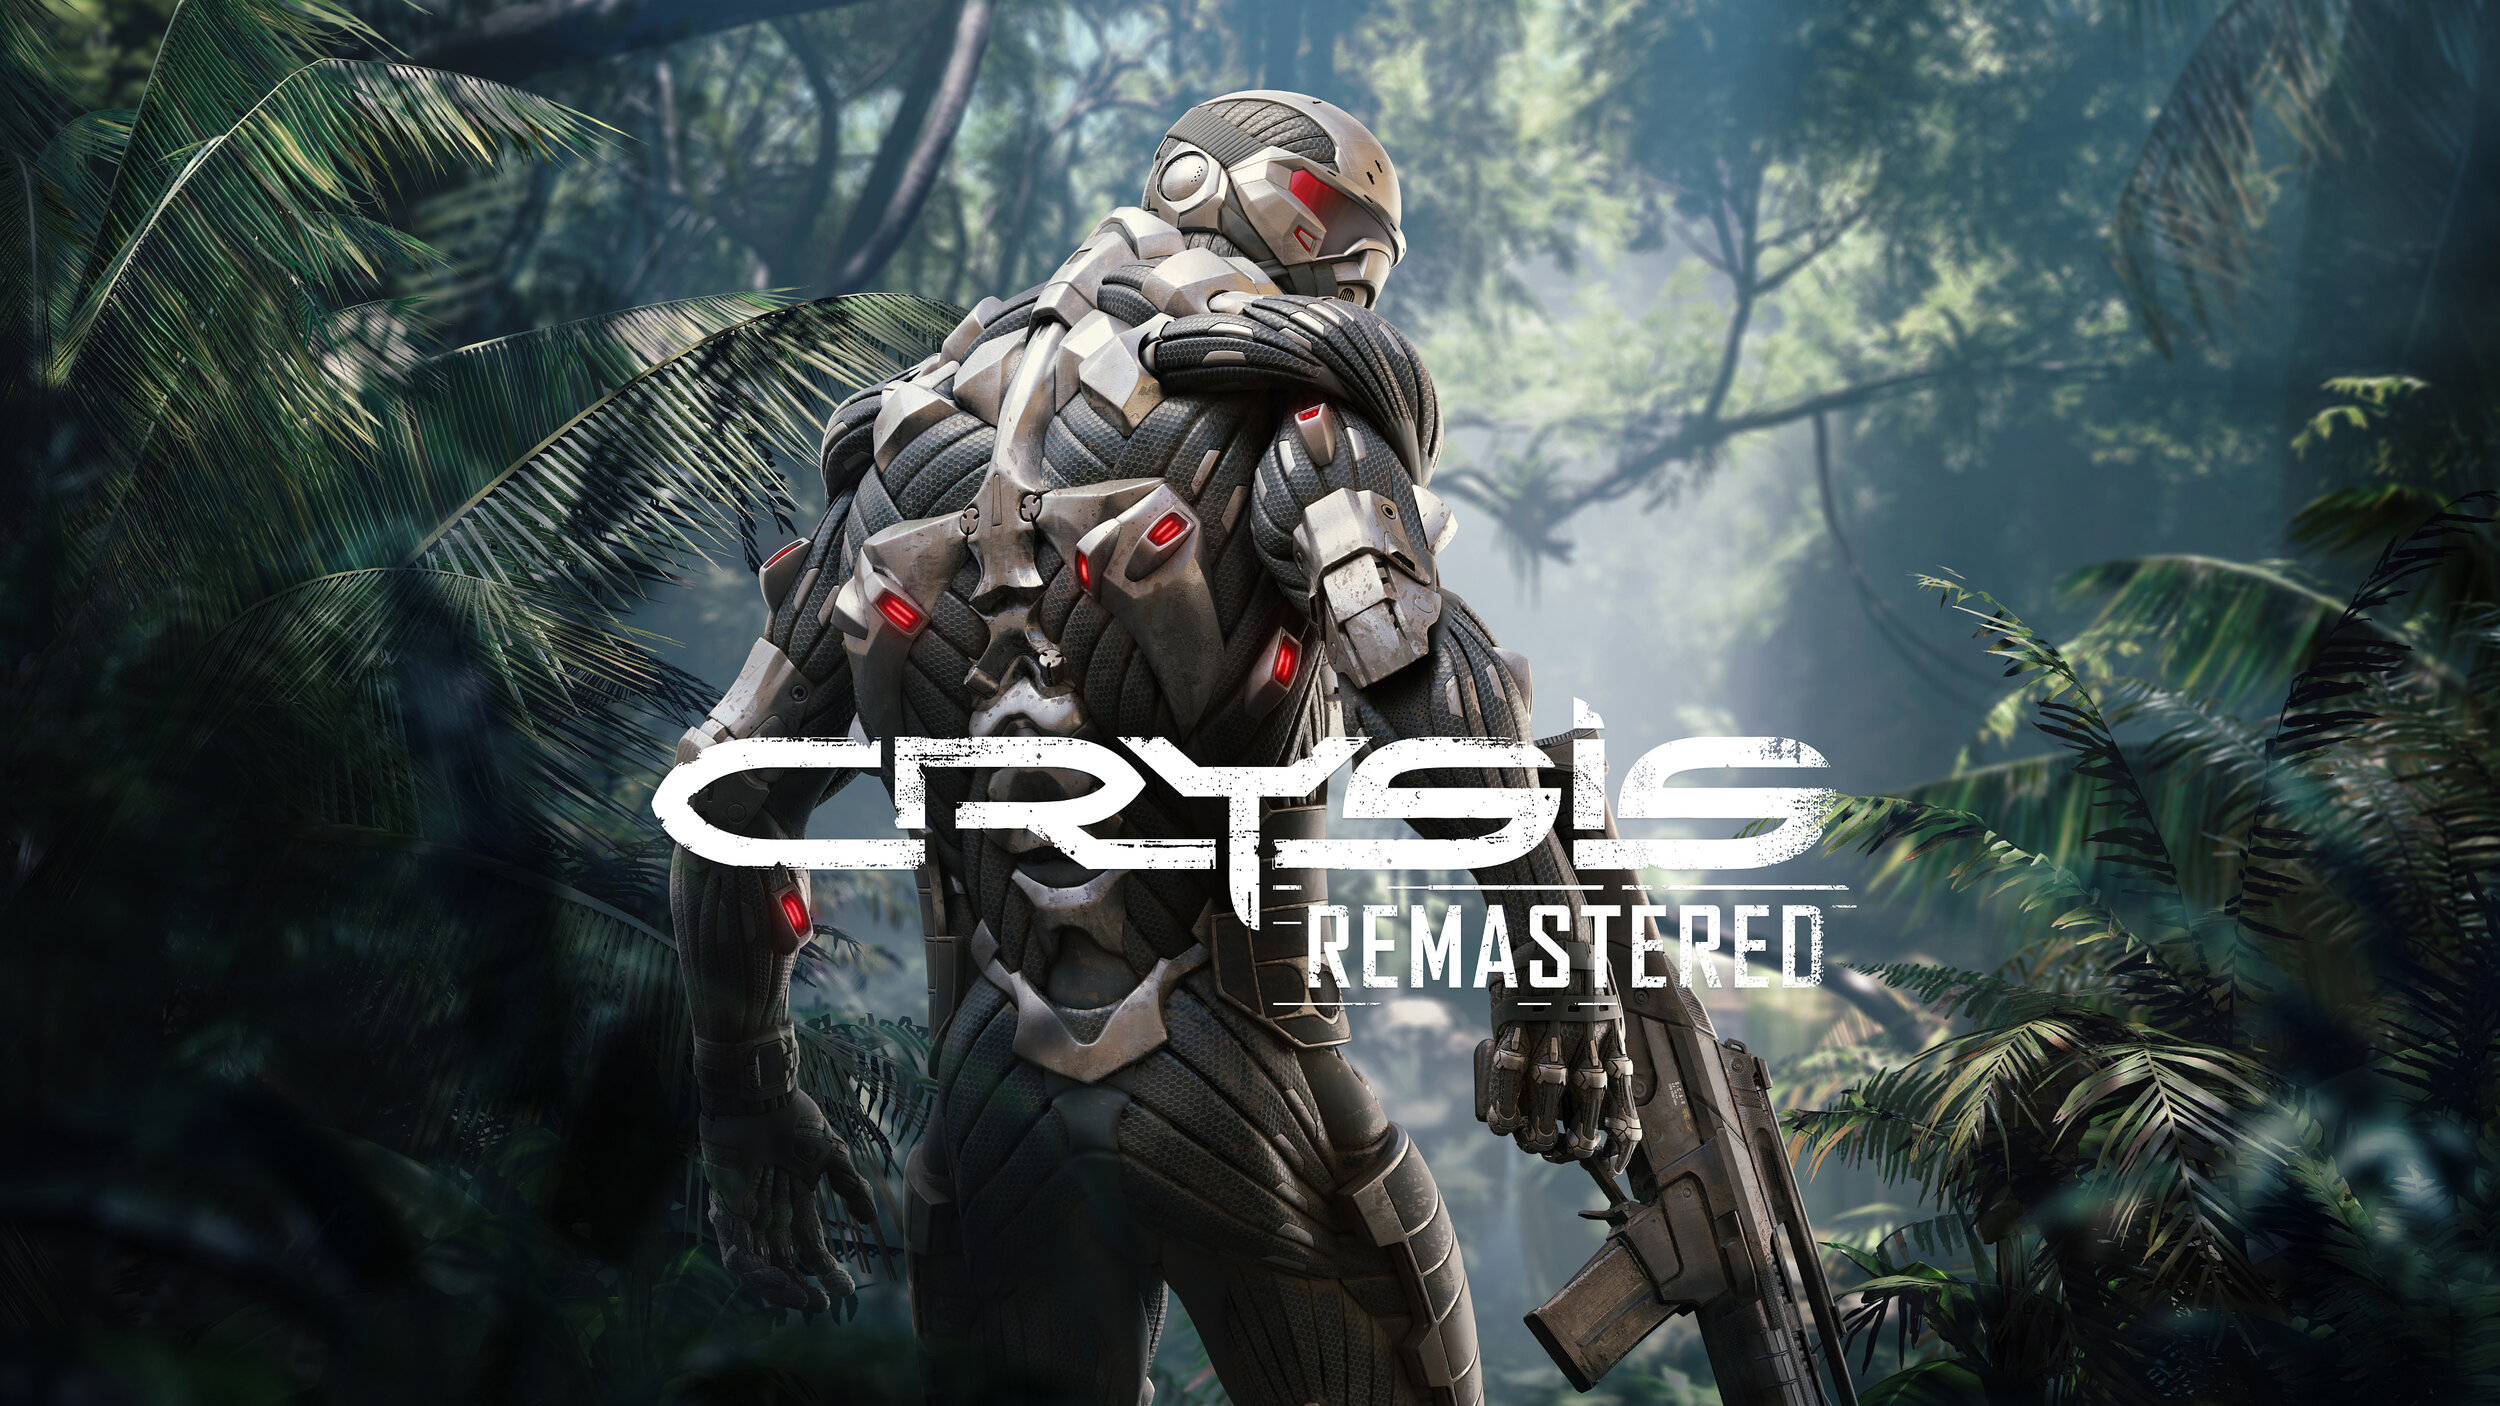 Crysis Remastered Key Art With Title.jpg